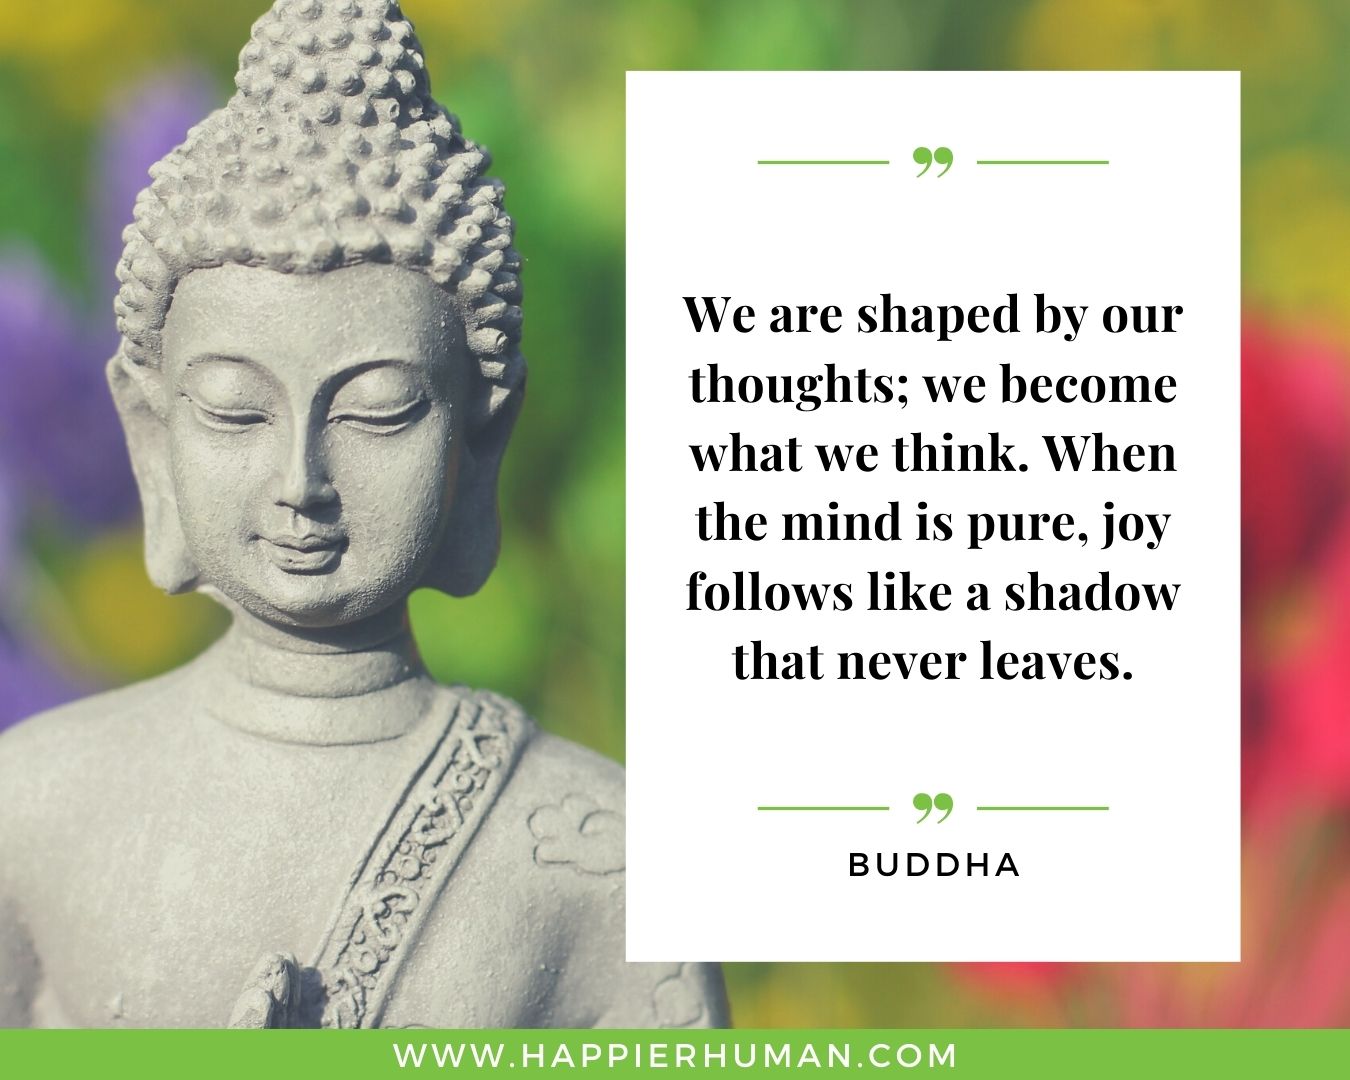 Positive Energy Quotes - “We are shaped by our thoughts; we become what we think. When the mind is pure, joy follows like a shadow that never leaves.” - Buddha